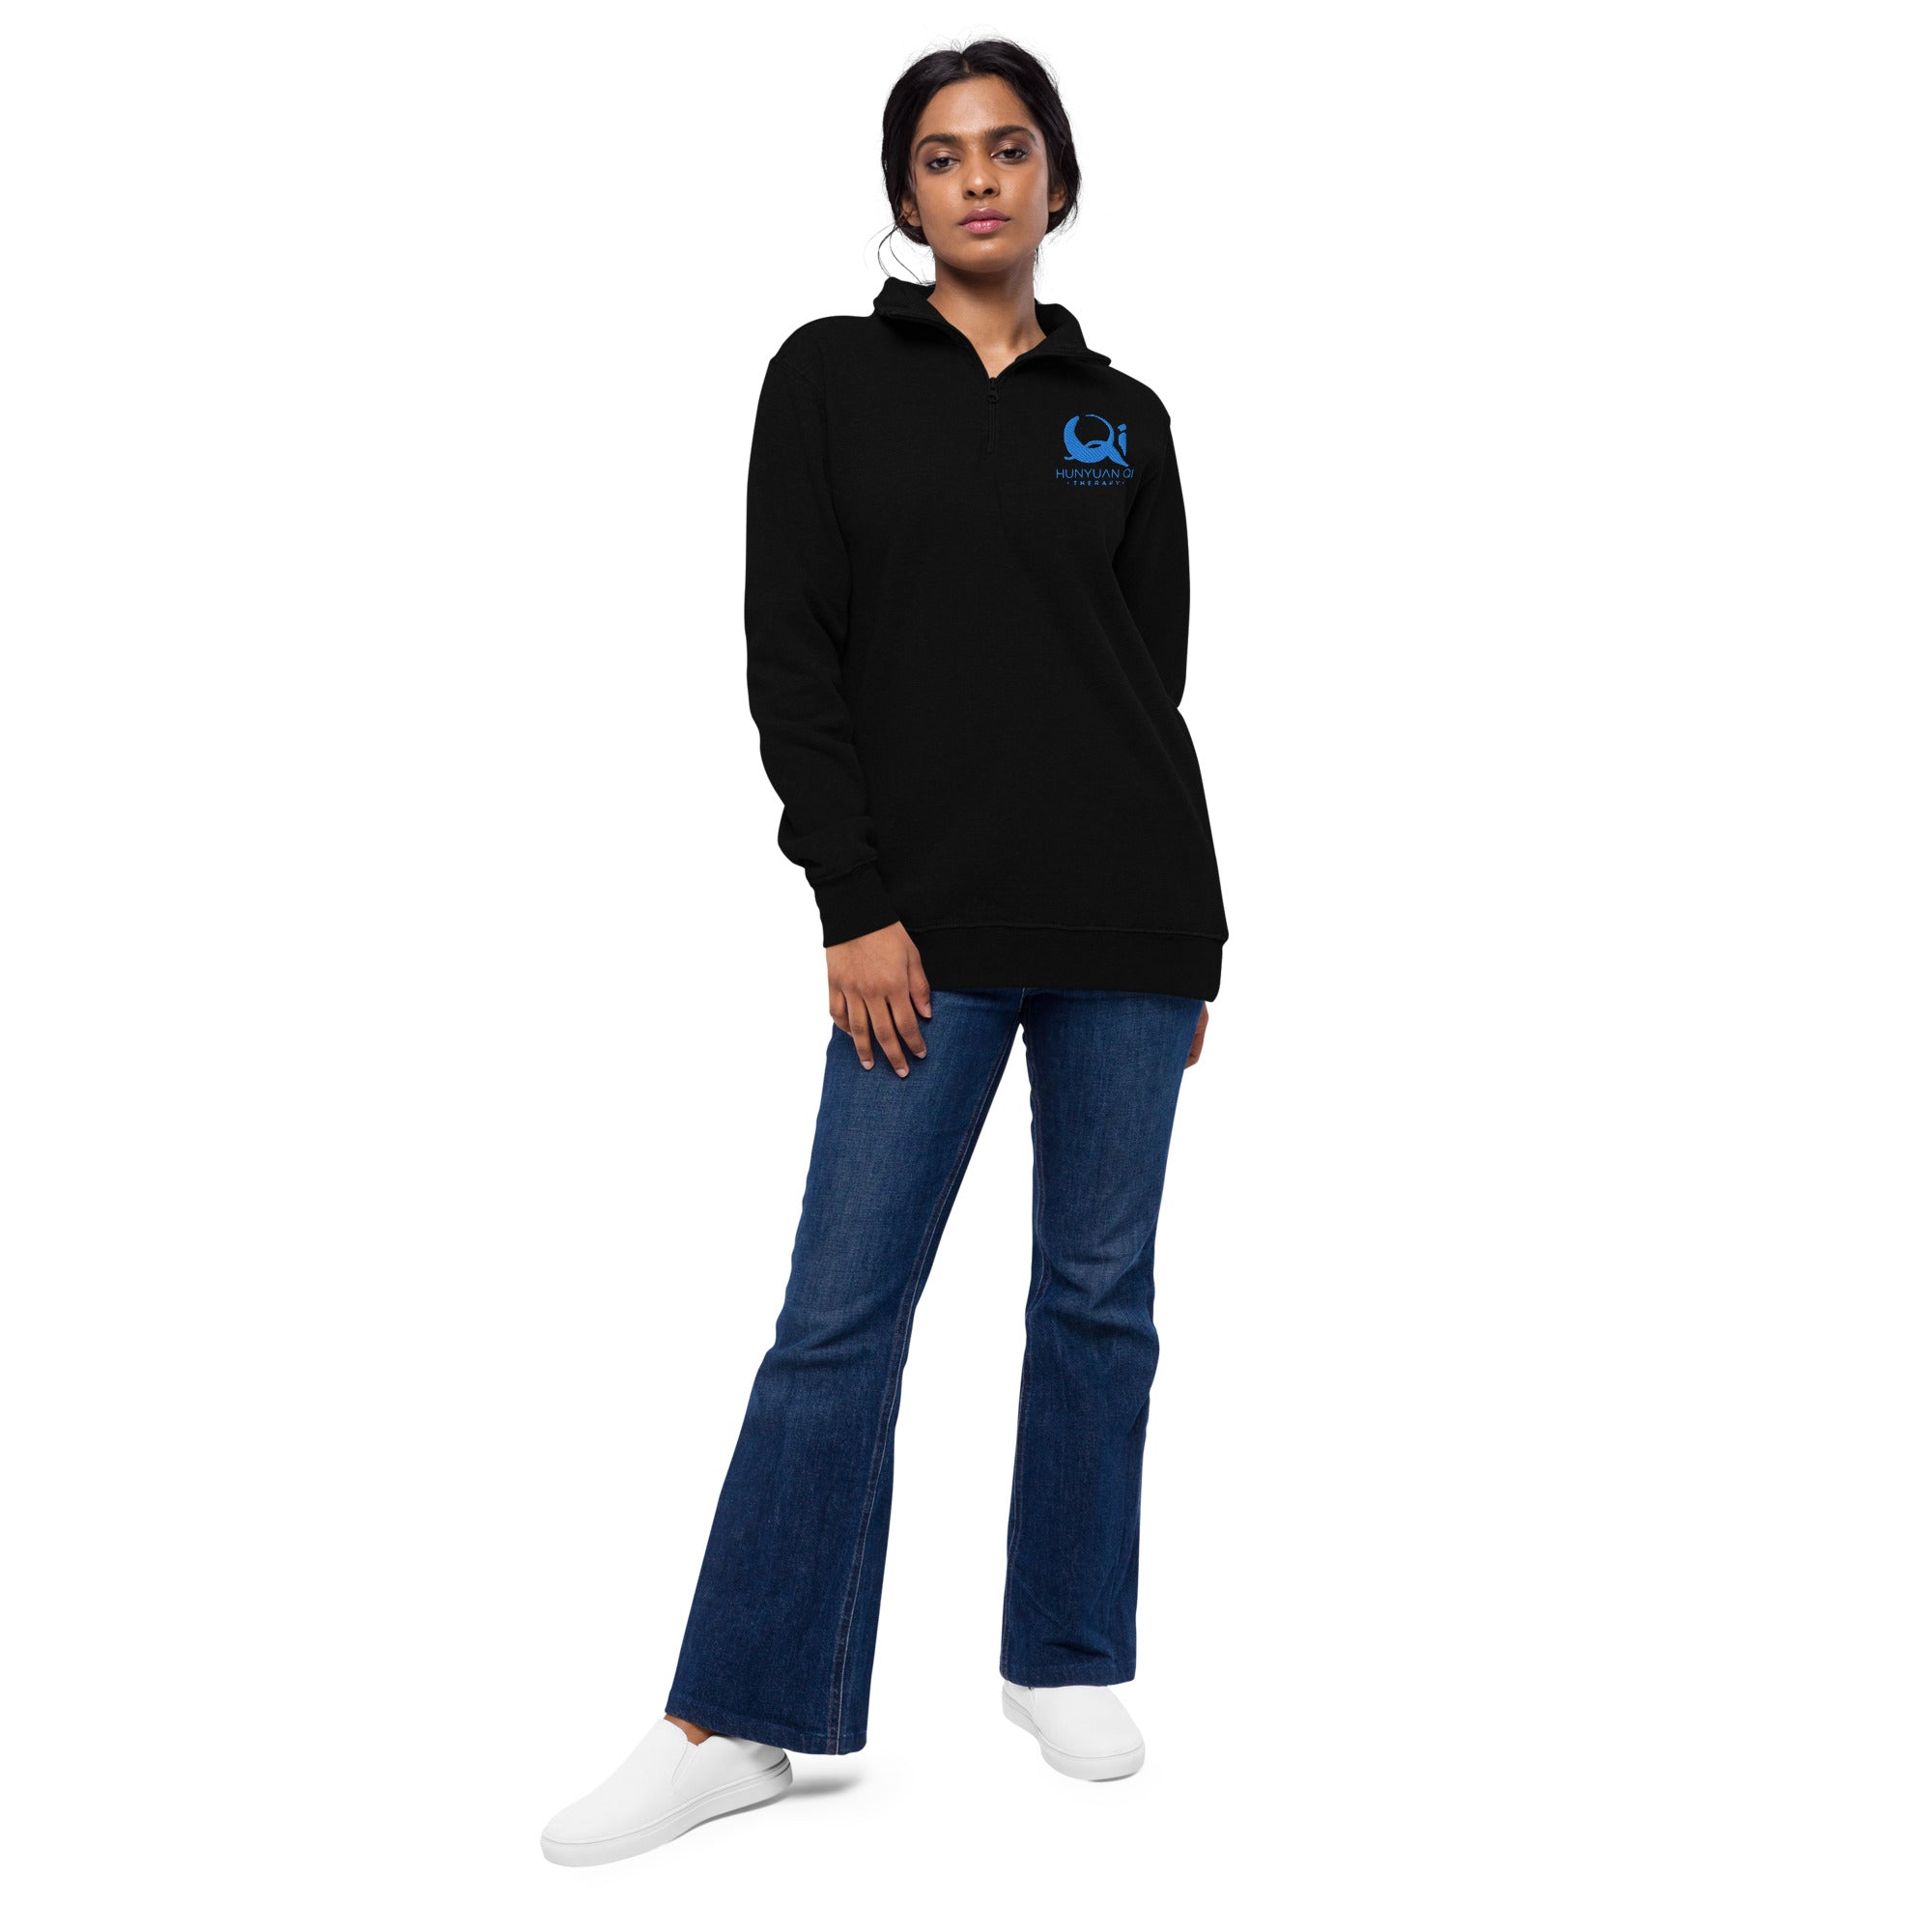 Hunyuan Qi Therapy fleece pullover (Unisex)